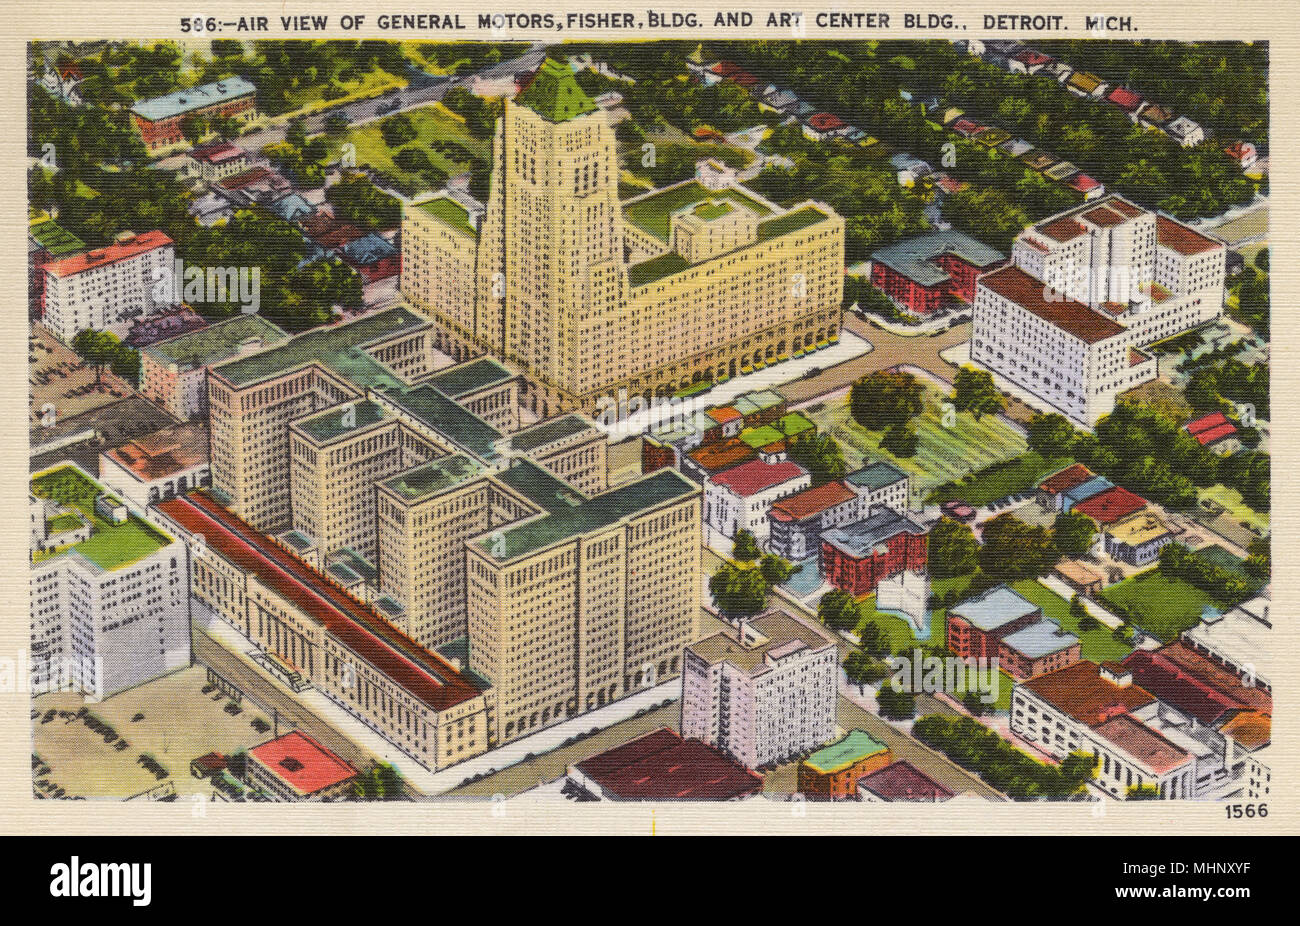 Aerial view of General Motors building, Fisher Building and Art Centre Building, Detroit, Michigan, USA.     Date: circa 1940 Stock Photo